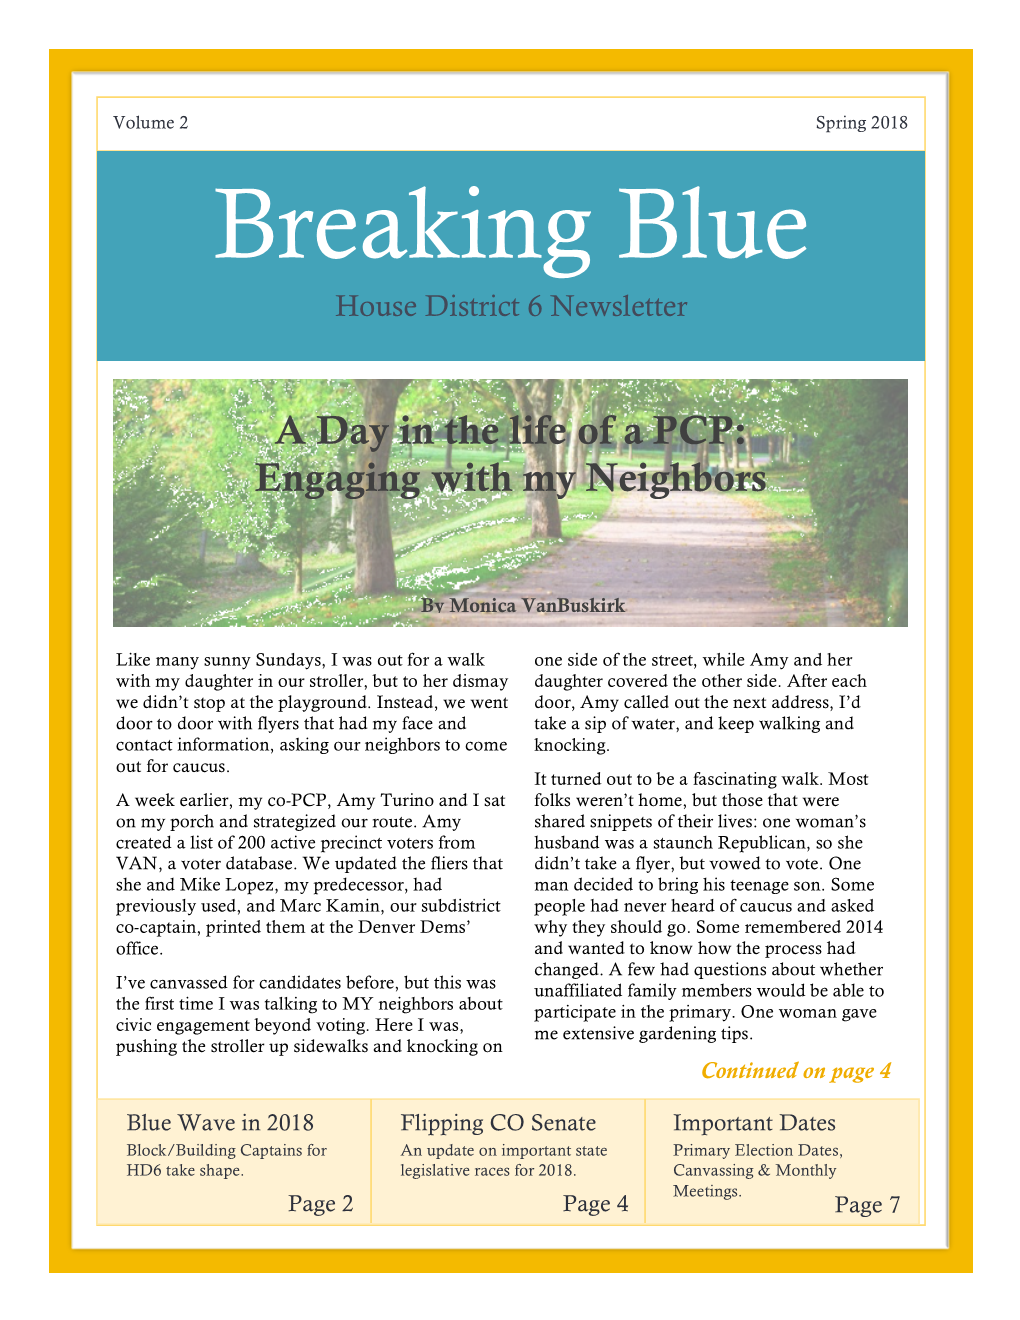 Breaking Blue House District 6 Newsletter